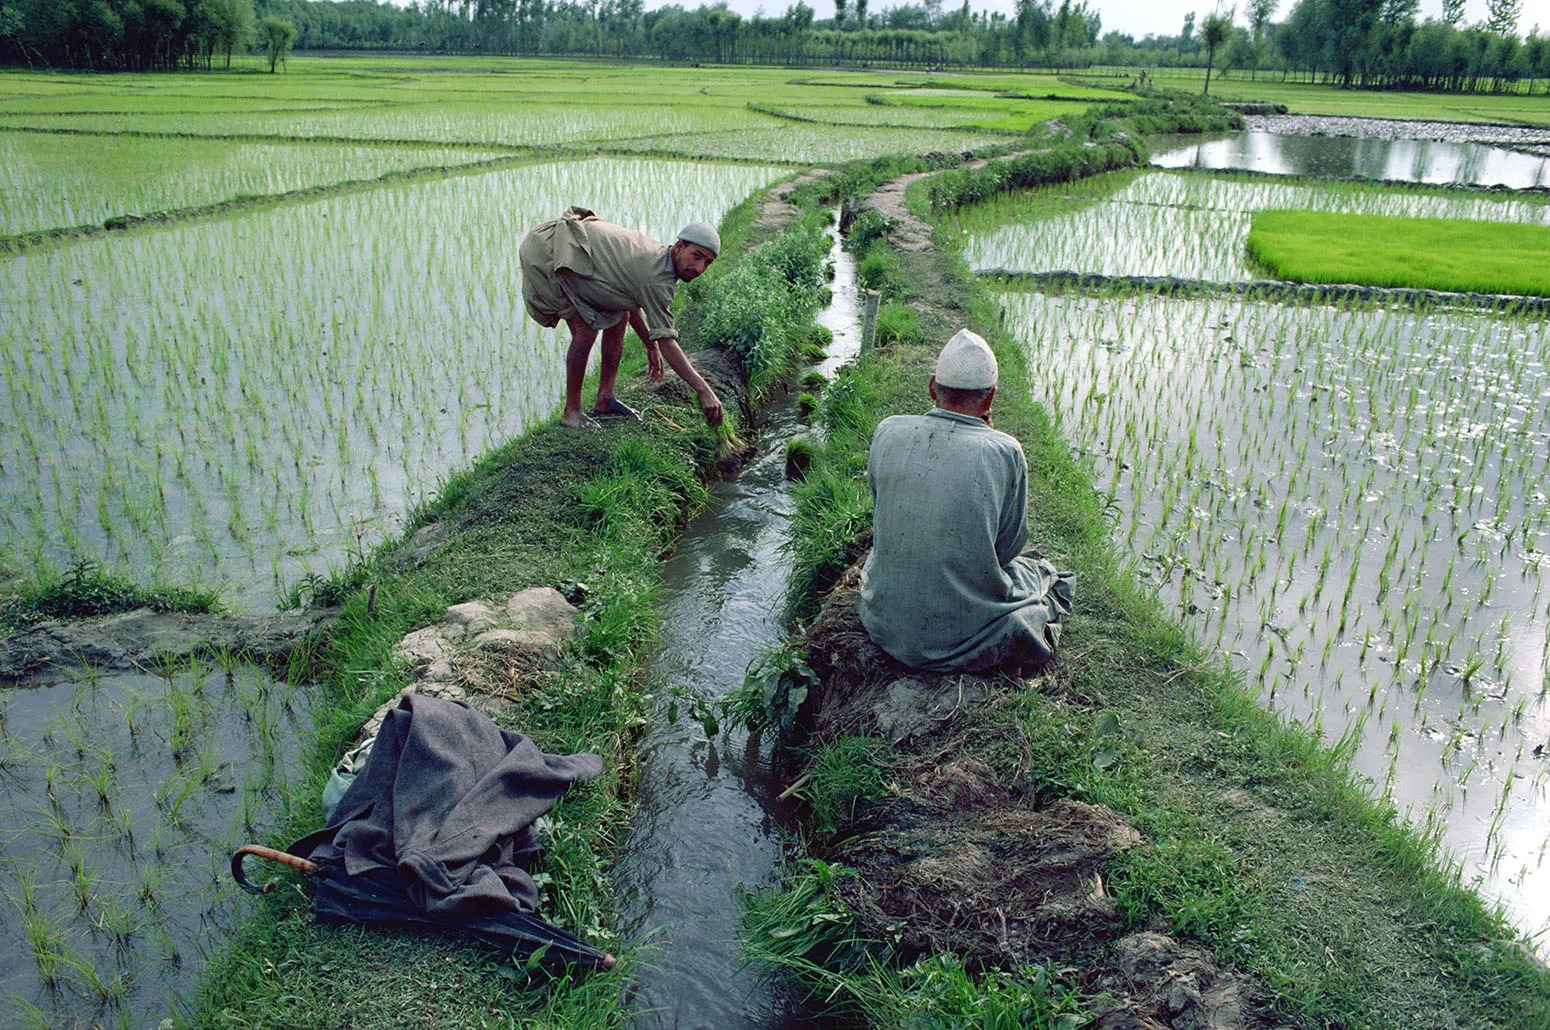 J&K administration approves project worth Rs 463 crore to empower farmers